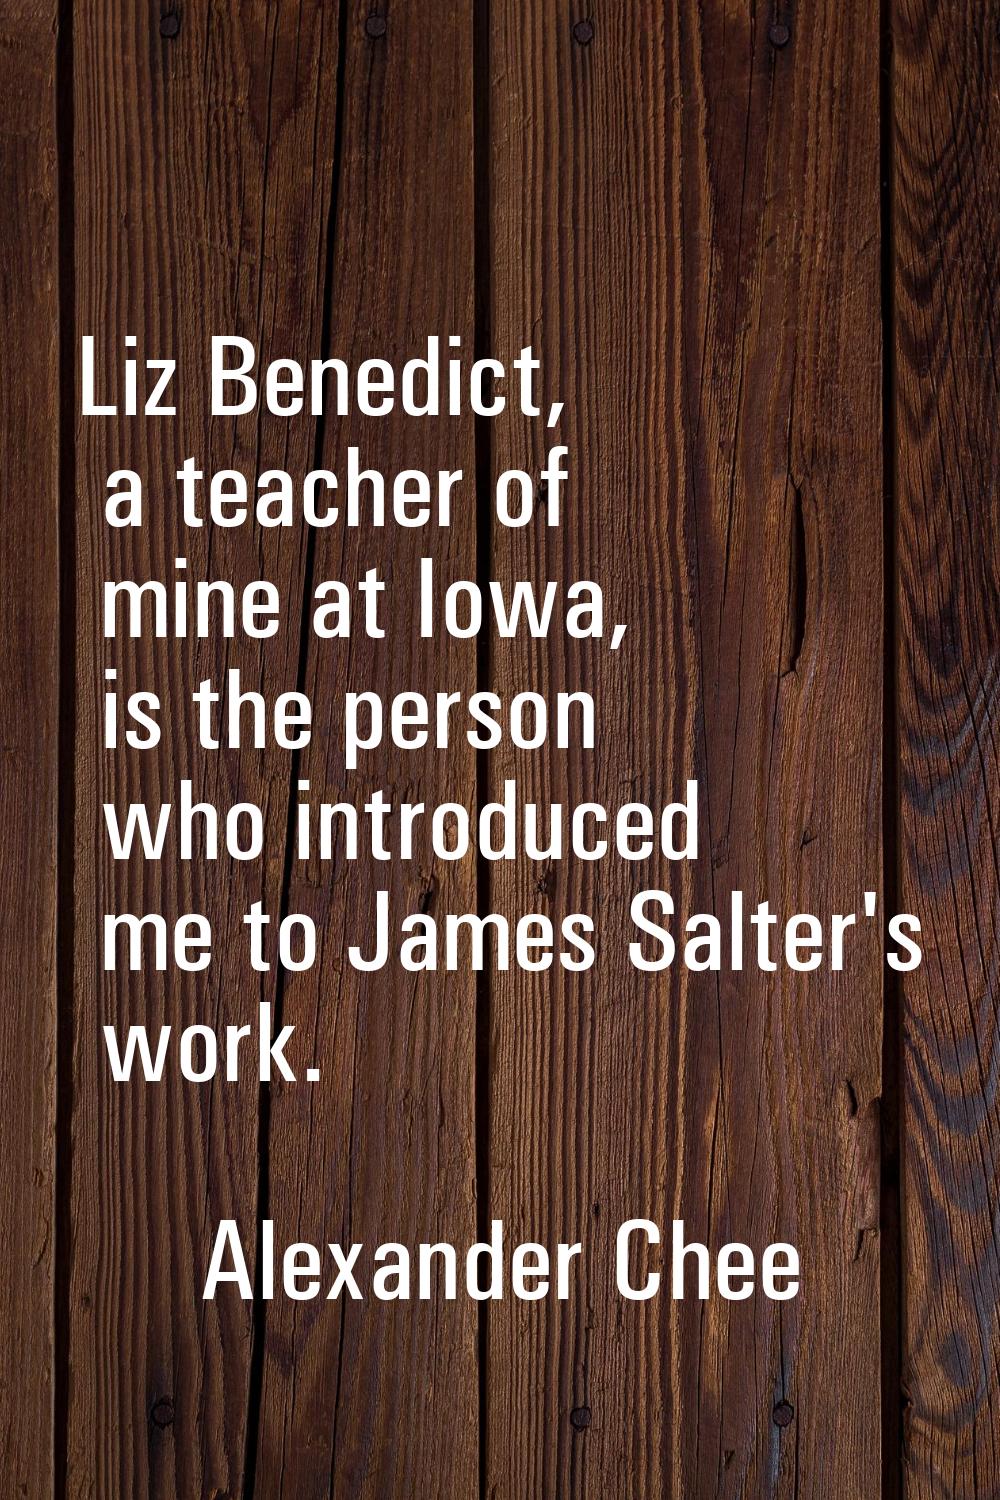 Liz Benedict, a teacher of mine at Iowa, is the person who introduced me to James Salter's work.